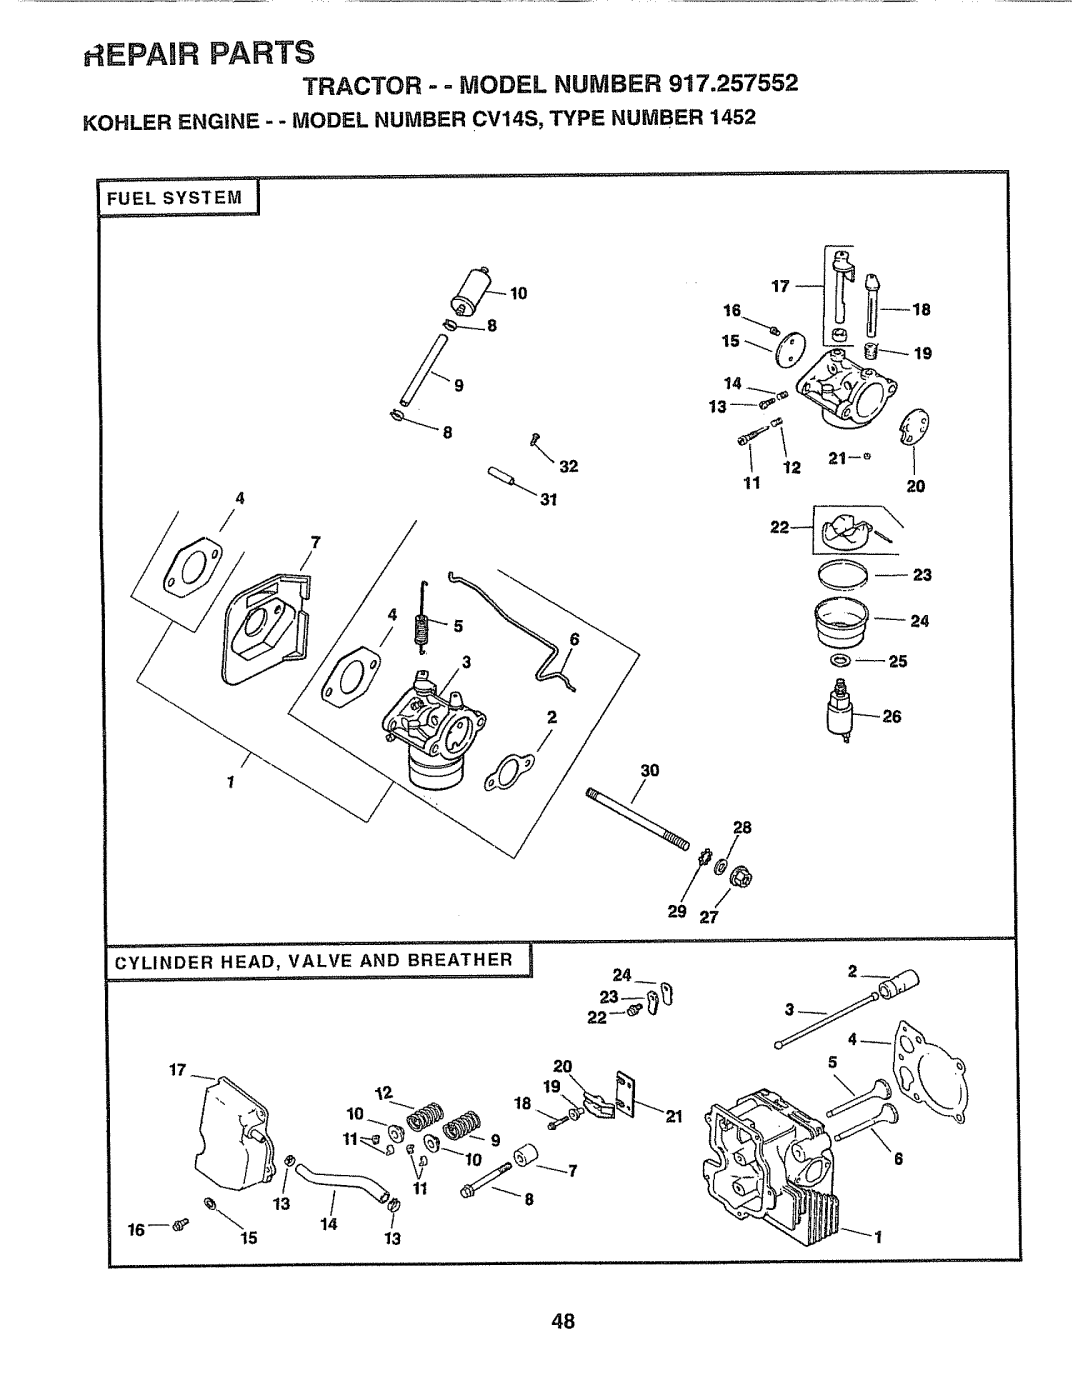 Sears 917.257552 manual FUELSV_TEMl, _Epaur Parts, Tractor -- Model Number, _1o 9, 1120, 3O 